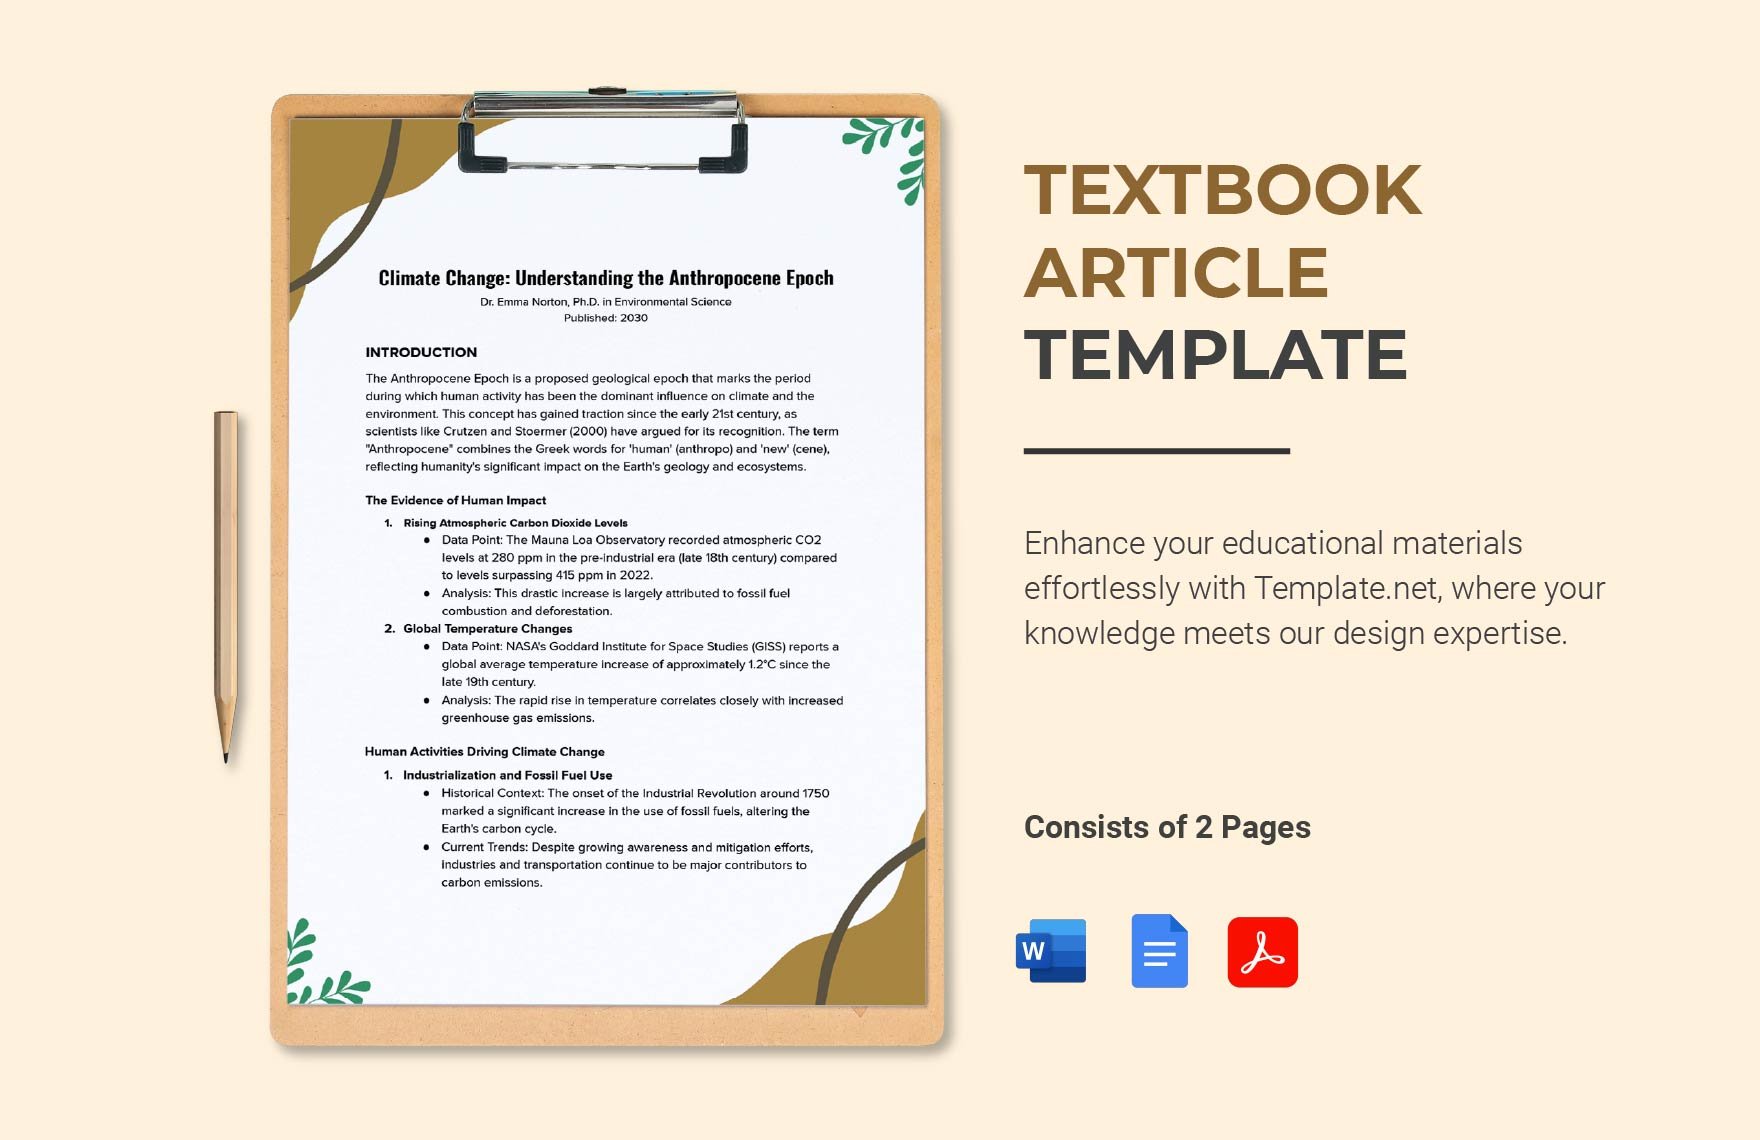 Textbook Article Template